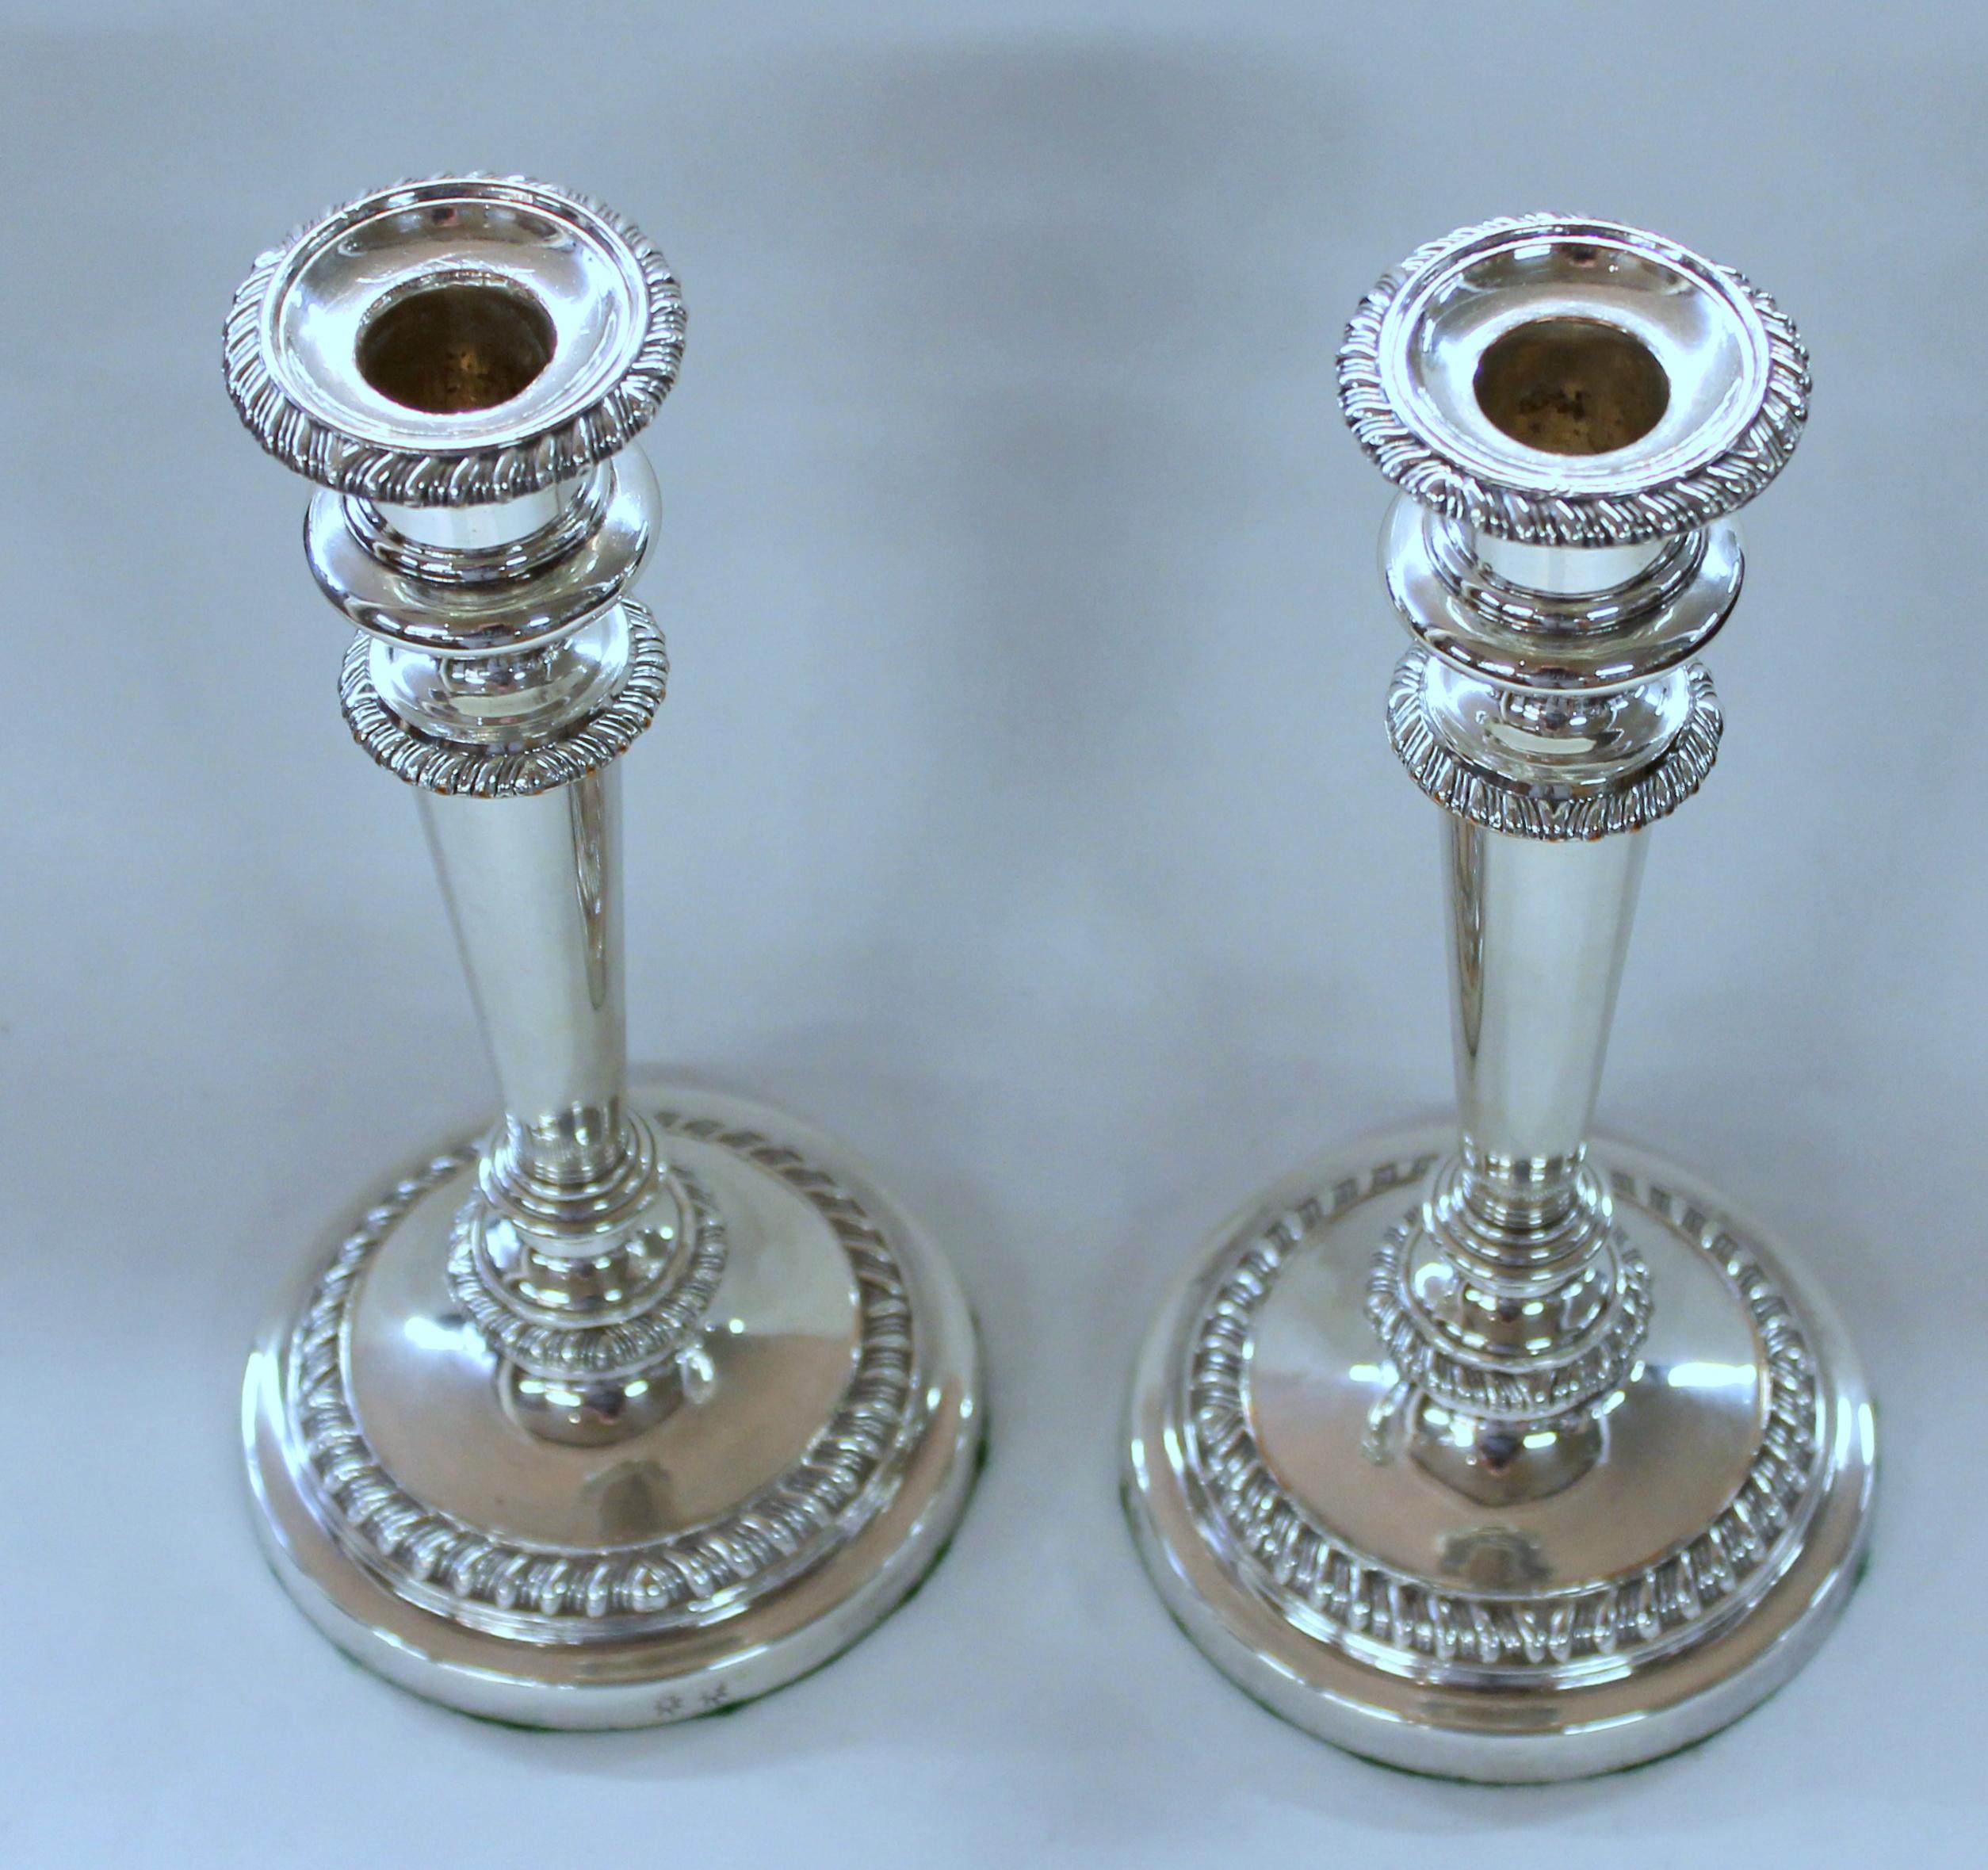 Pair of rare Matthew Boulton Old Sheffield plate George III round base candlesticks
Please note simple, handsome 